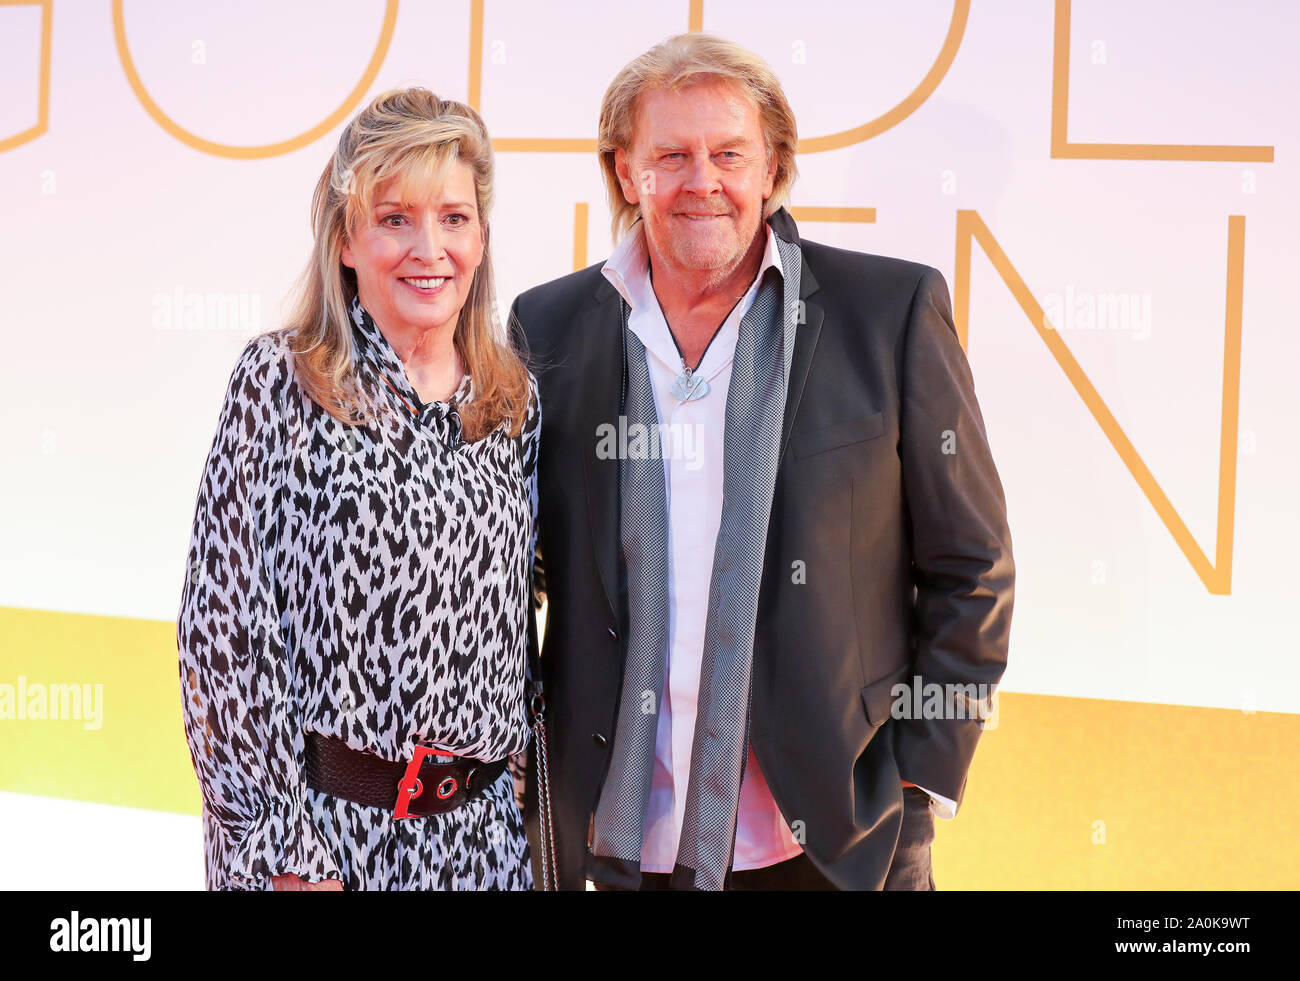 Leipzig, Germany. 20th Sep, 2019. Howard Carpendale and his wife Donnice Pierce come to the television gala 'Golden Hen'. A total of 53 nominees from show business, society and sport can hope for the award. The Golden Hen is dedicated to the GDR entertainer Hahnemann, who died in 1991. Credit: Jan Woitas/dpa-Zentralbild/dpa/Alamy Live News Stock Photo